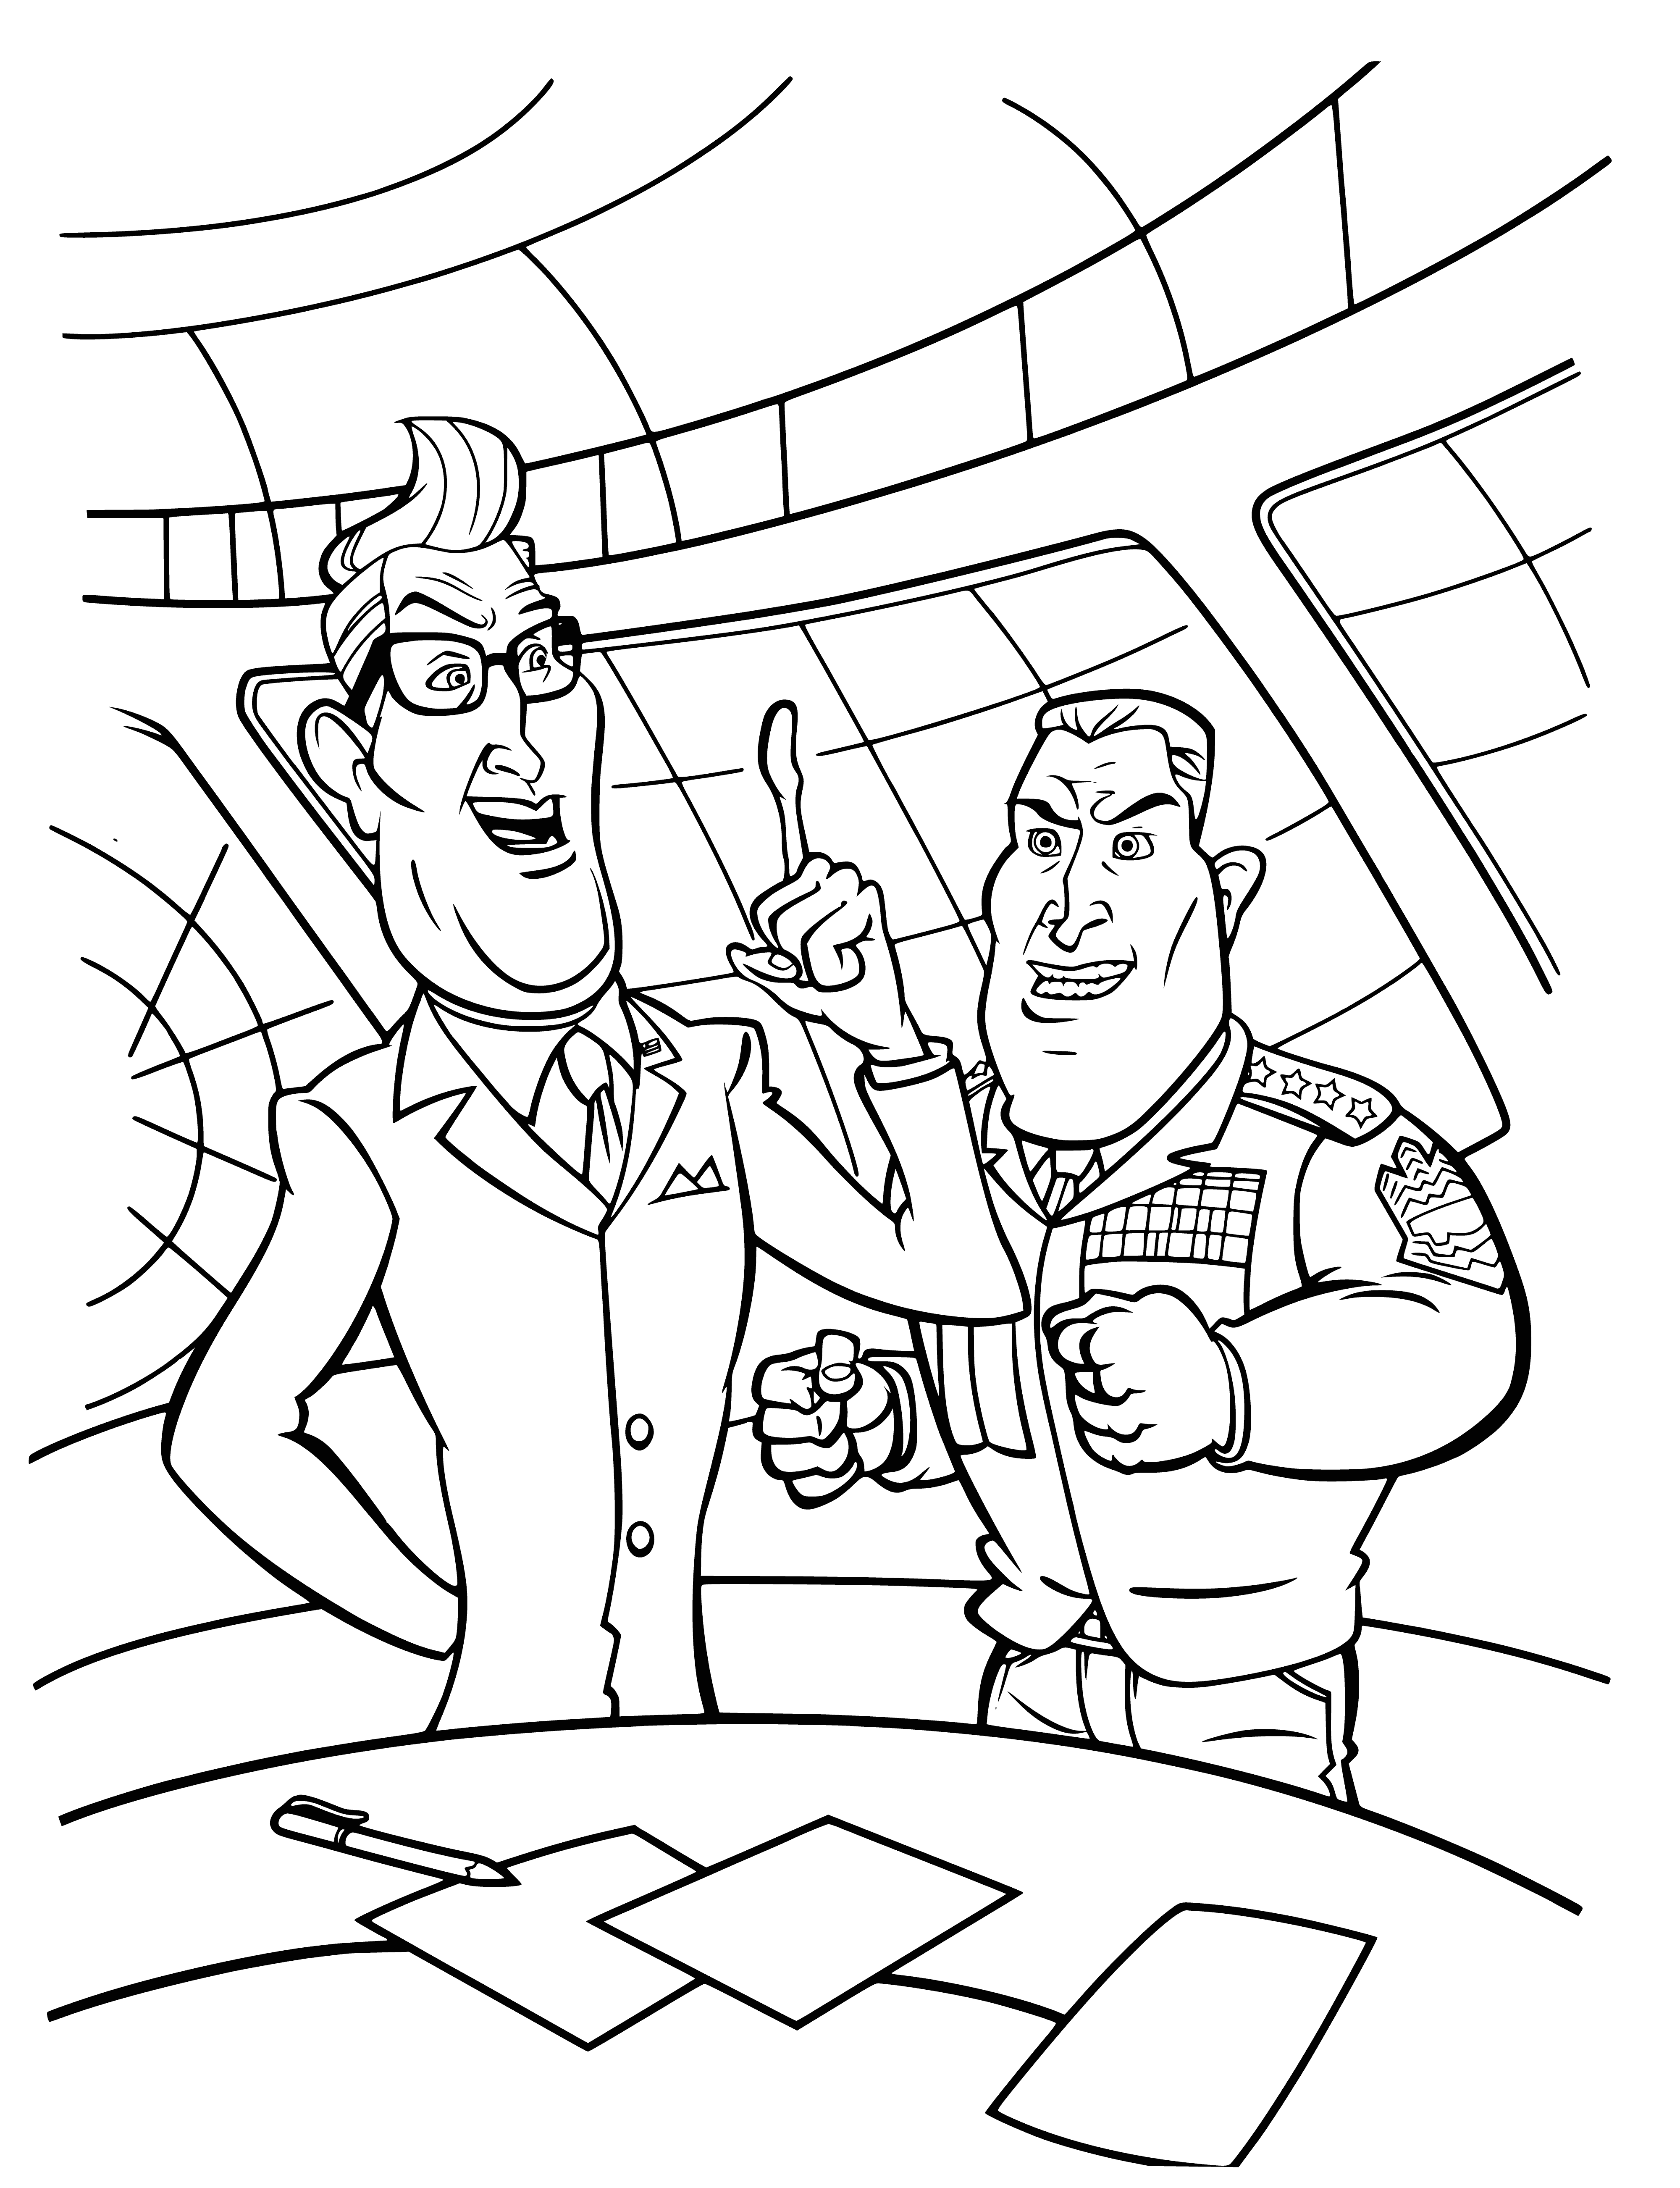 President and Voyaker coloring page